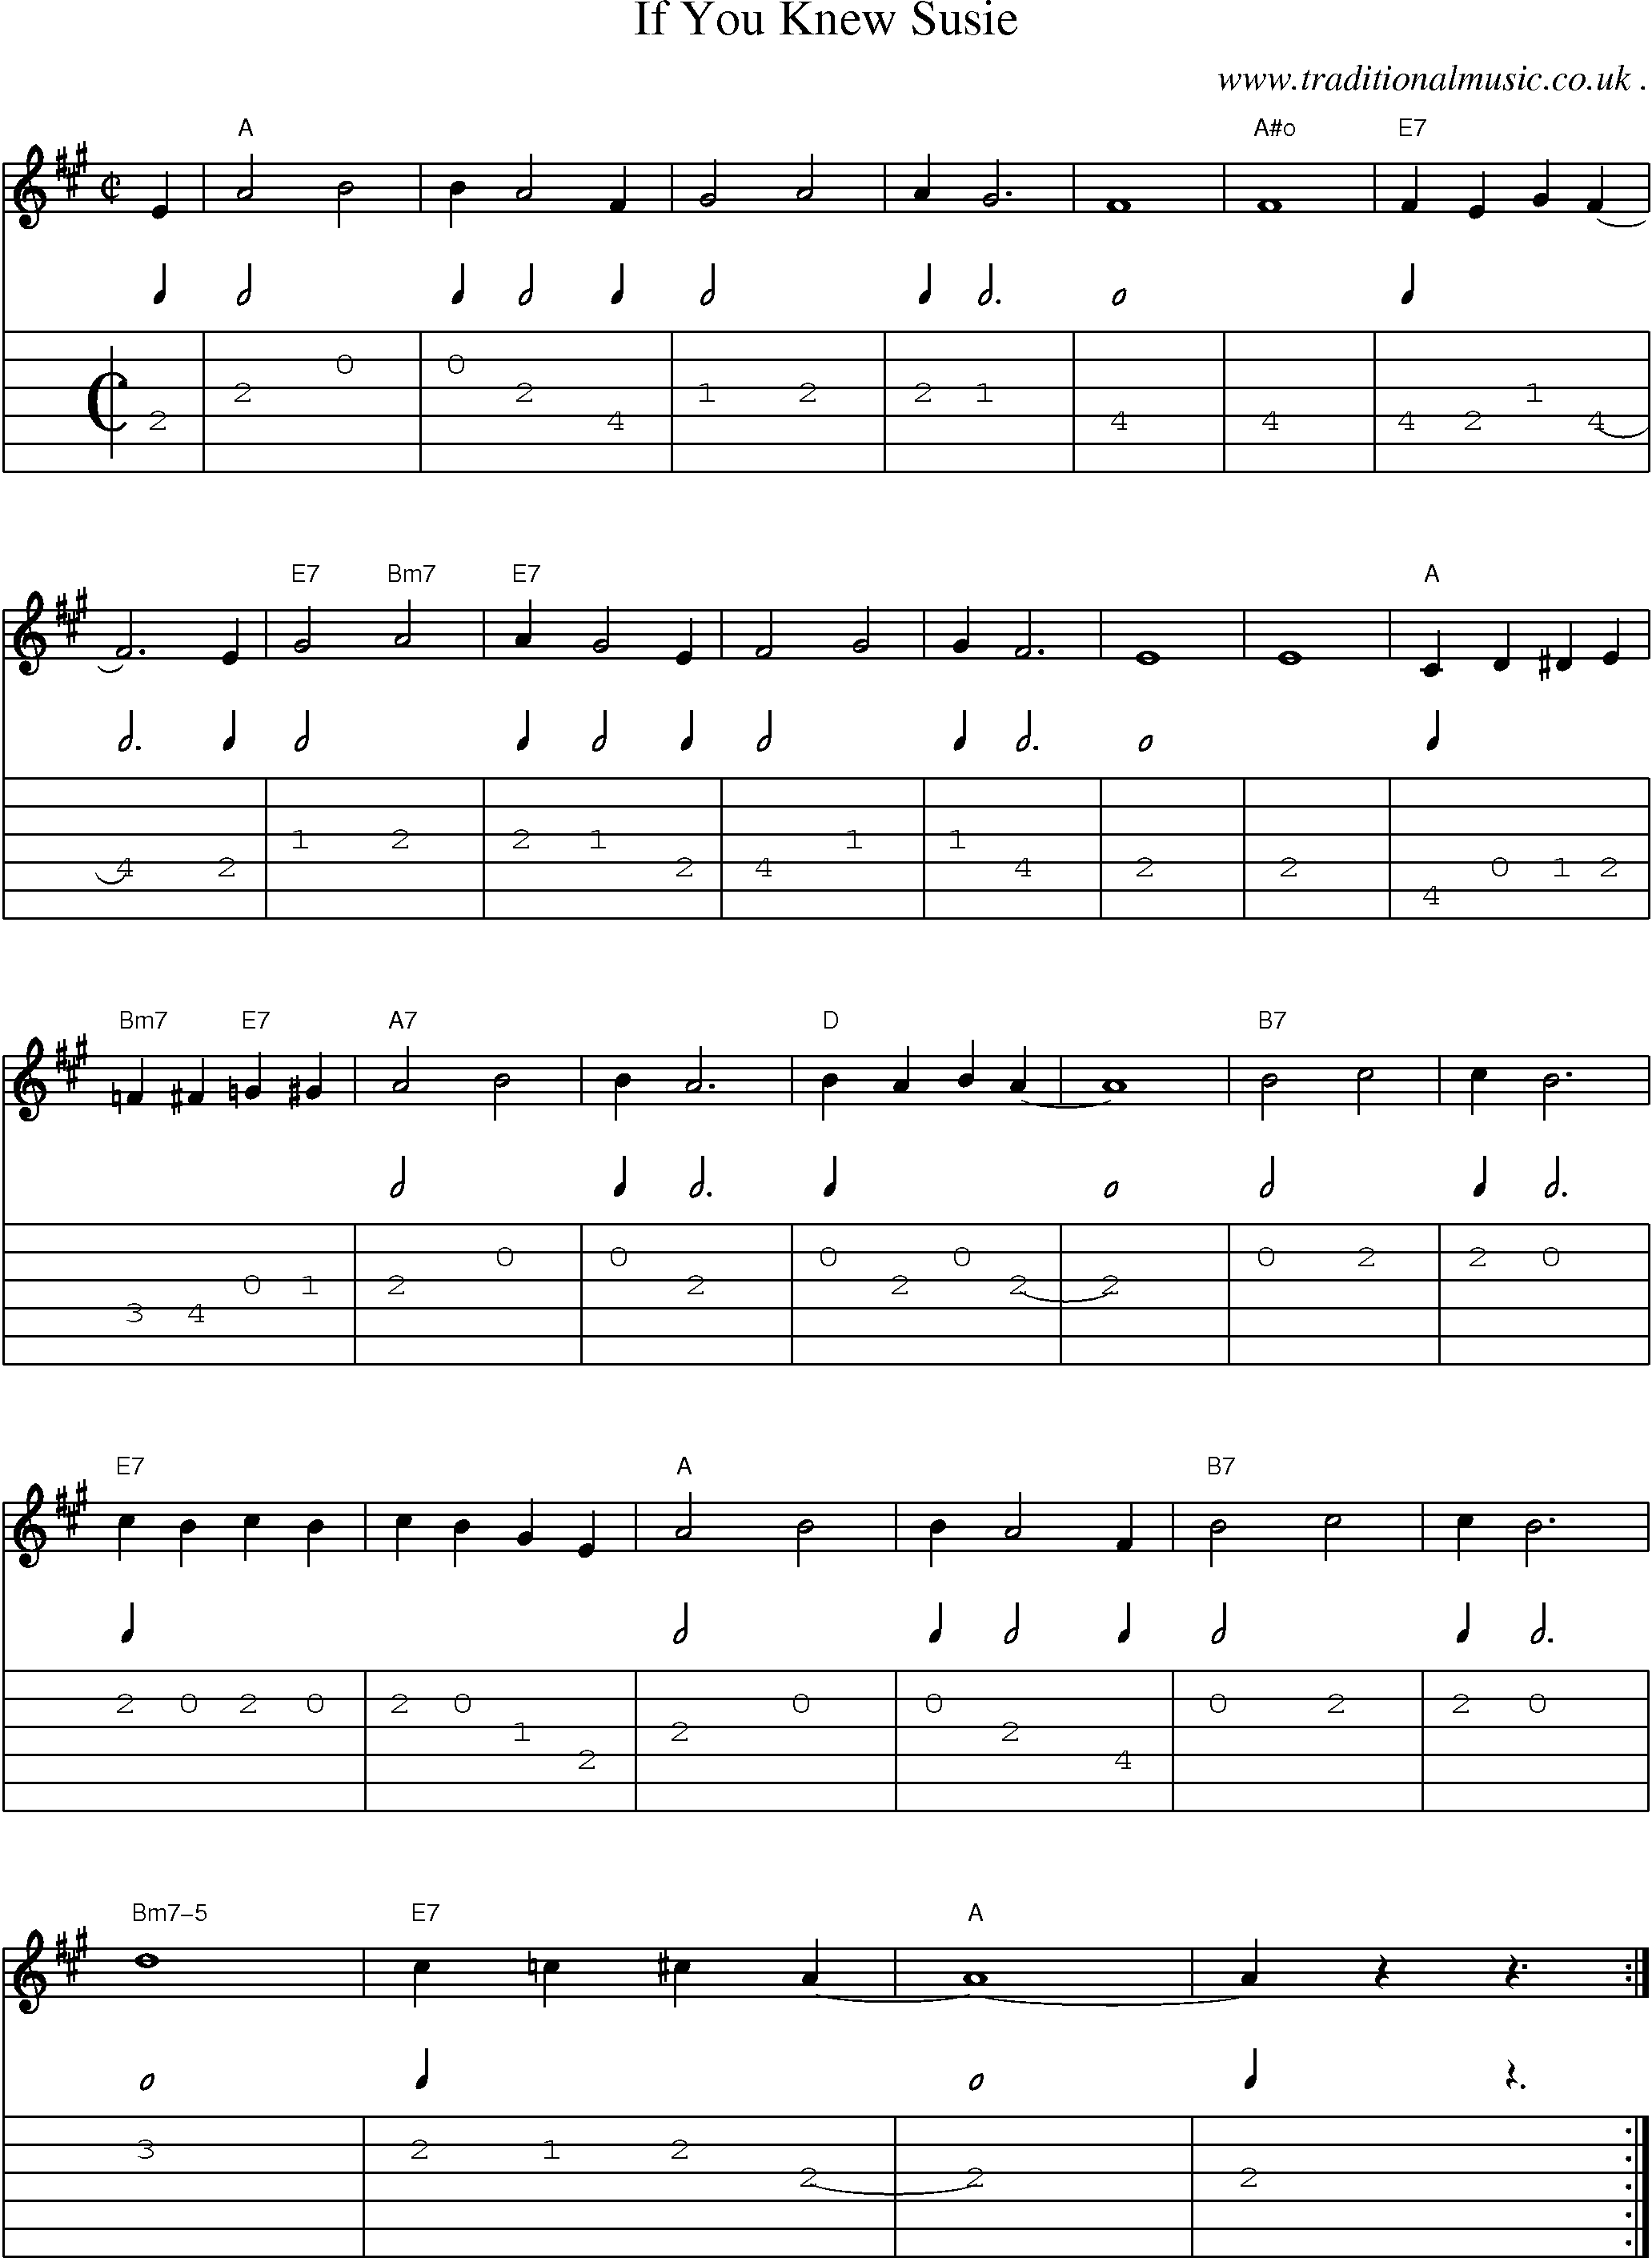 Music Score and Guitar Tabs for If You Knew Susie